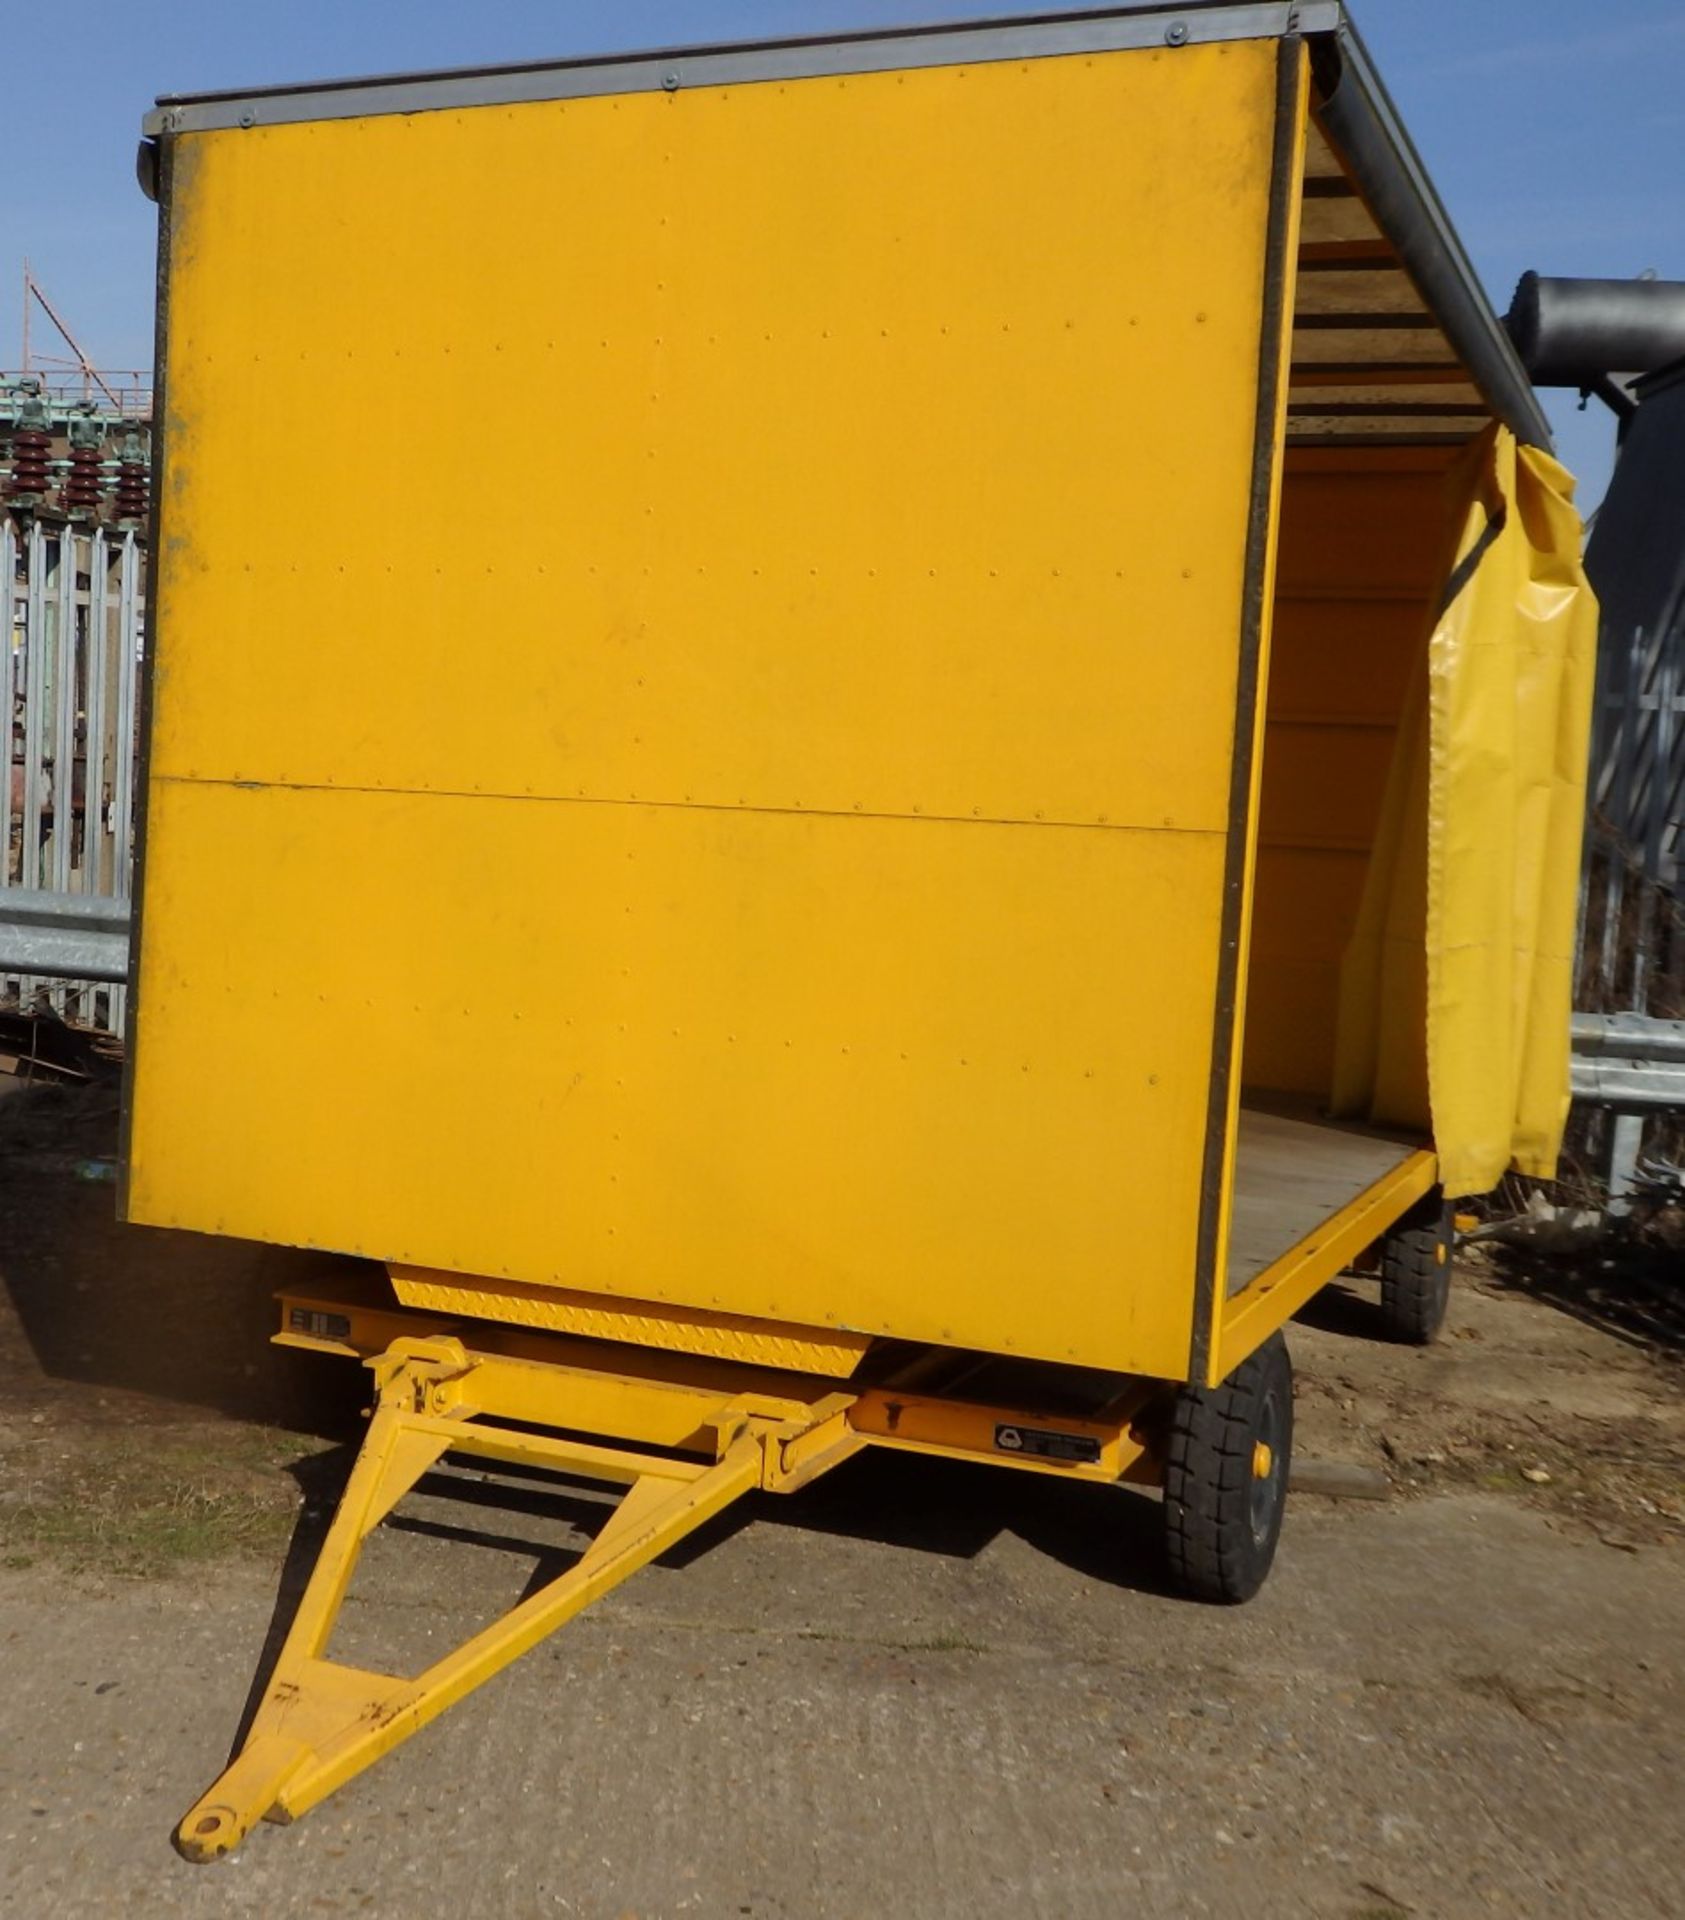 1 x Enclosed Curtain Sided Box Trailer With Turntable Steering - Alexander Trailers Model IP40ST - - Image 25 of 28